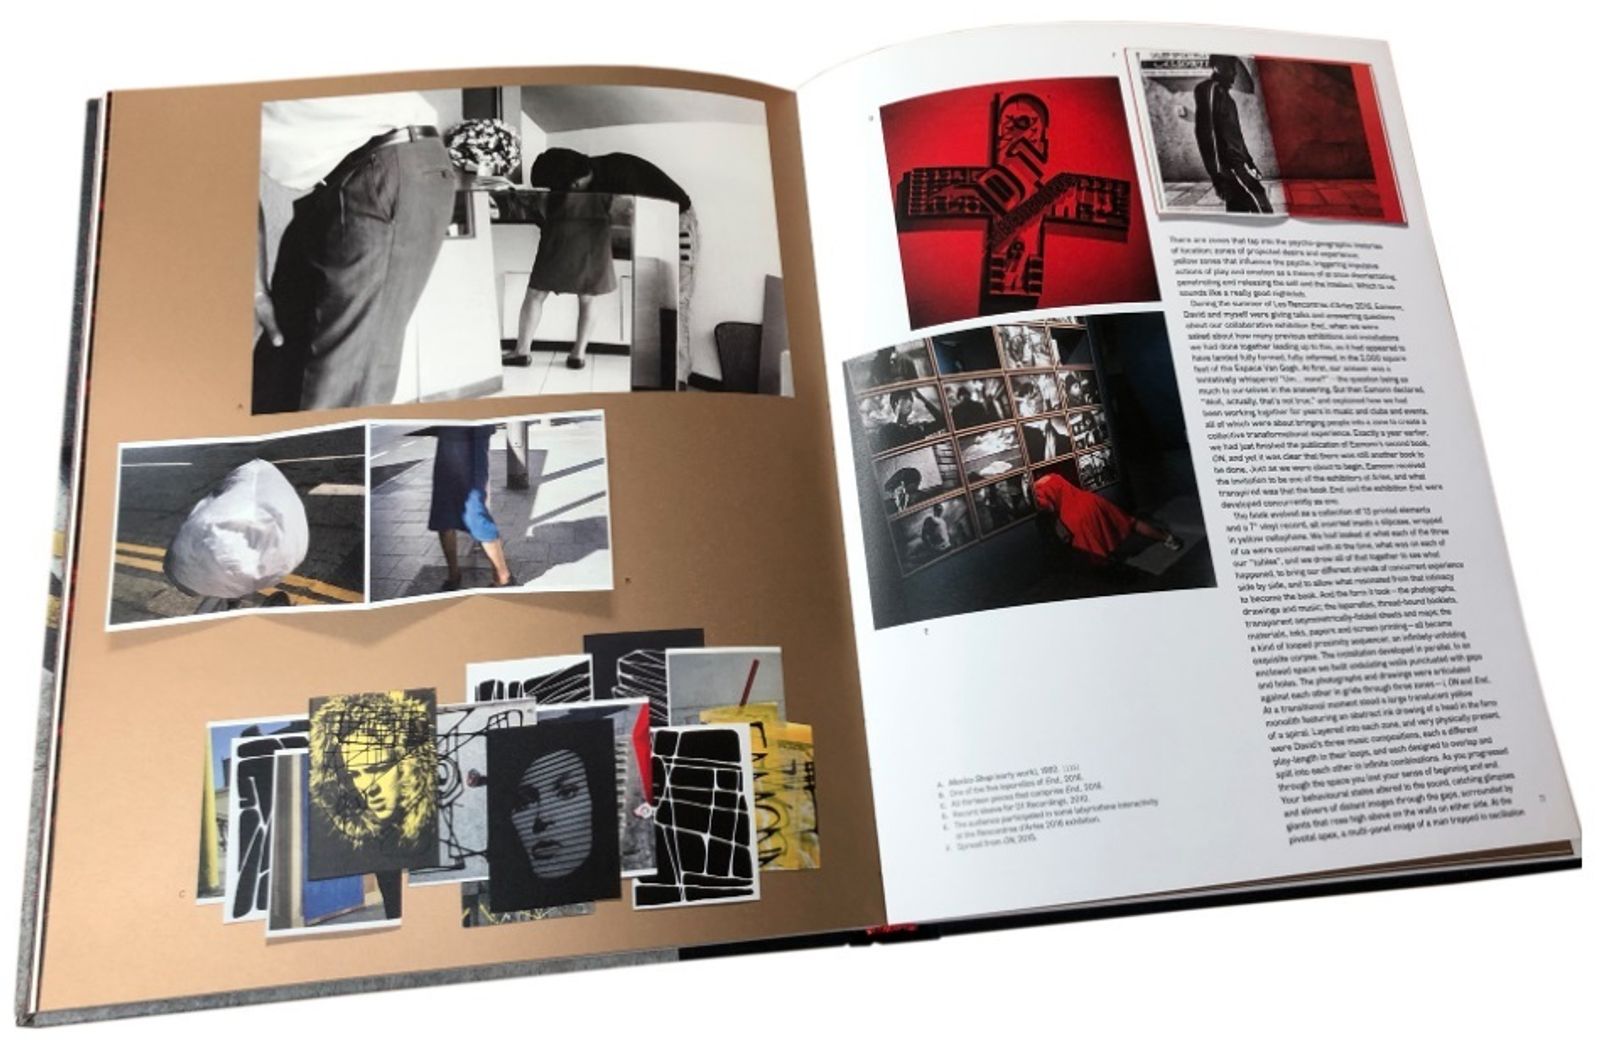 © Eamonn Doyle, spread from his Mapfre Foundation exhibition catalogue